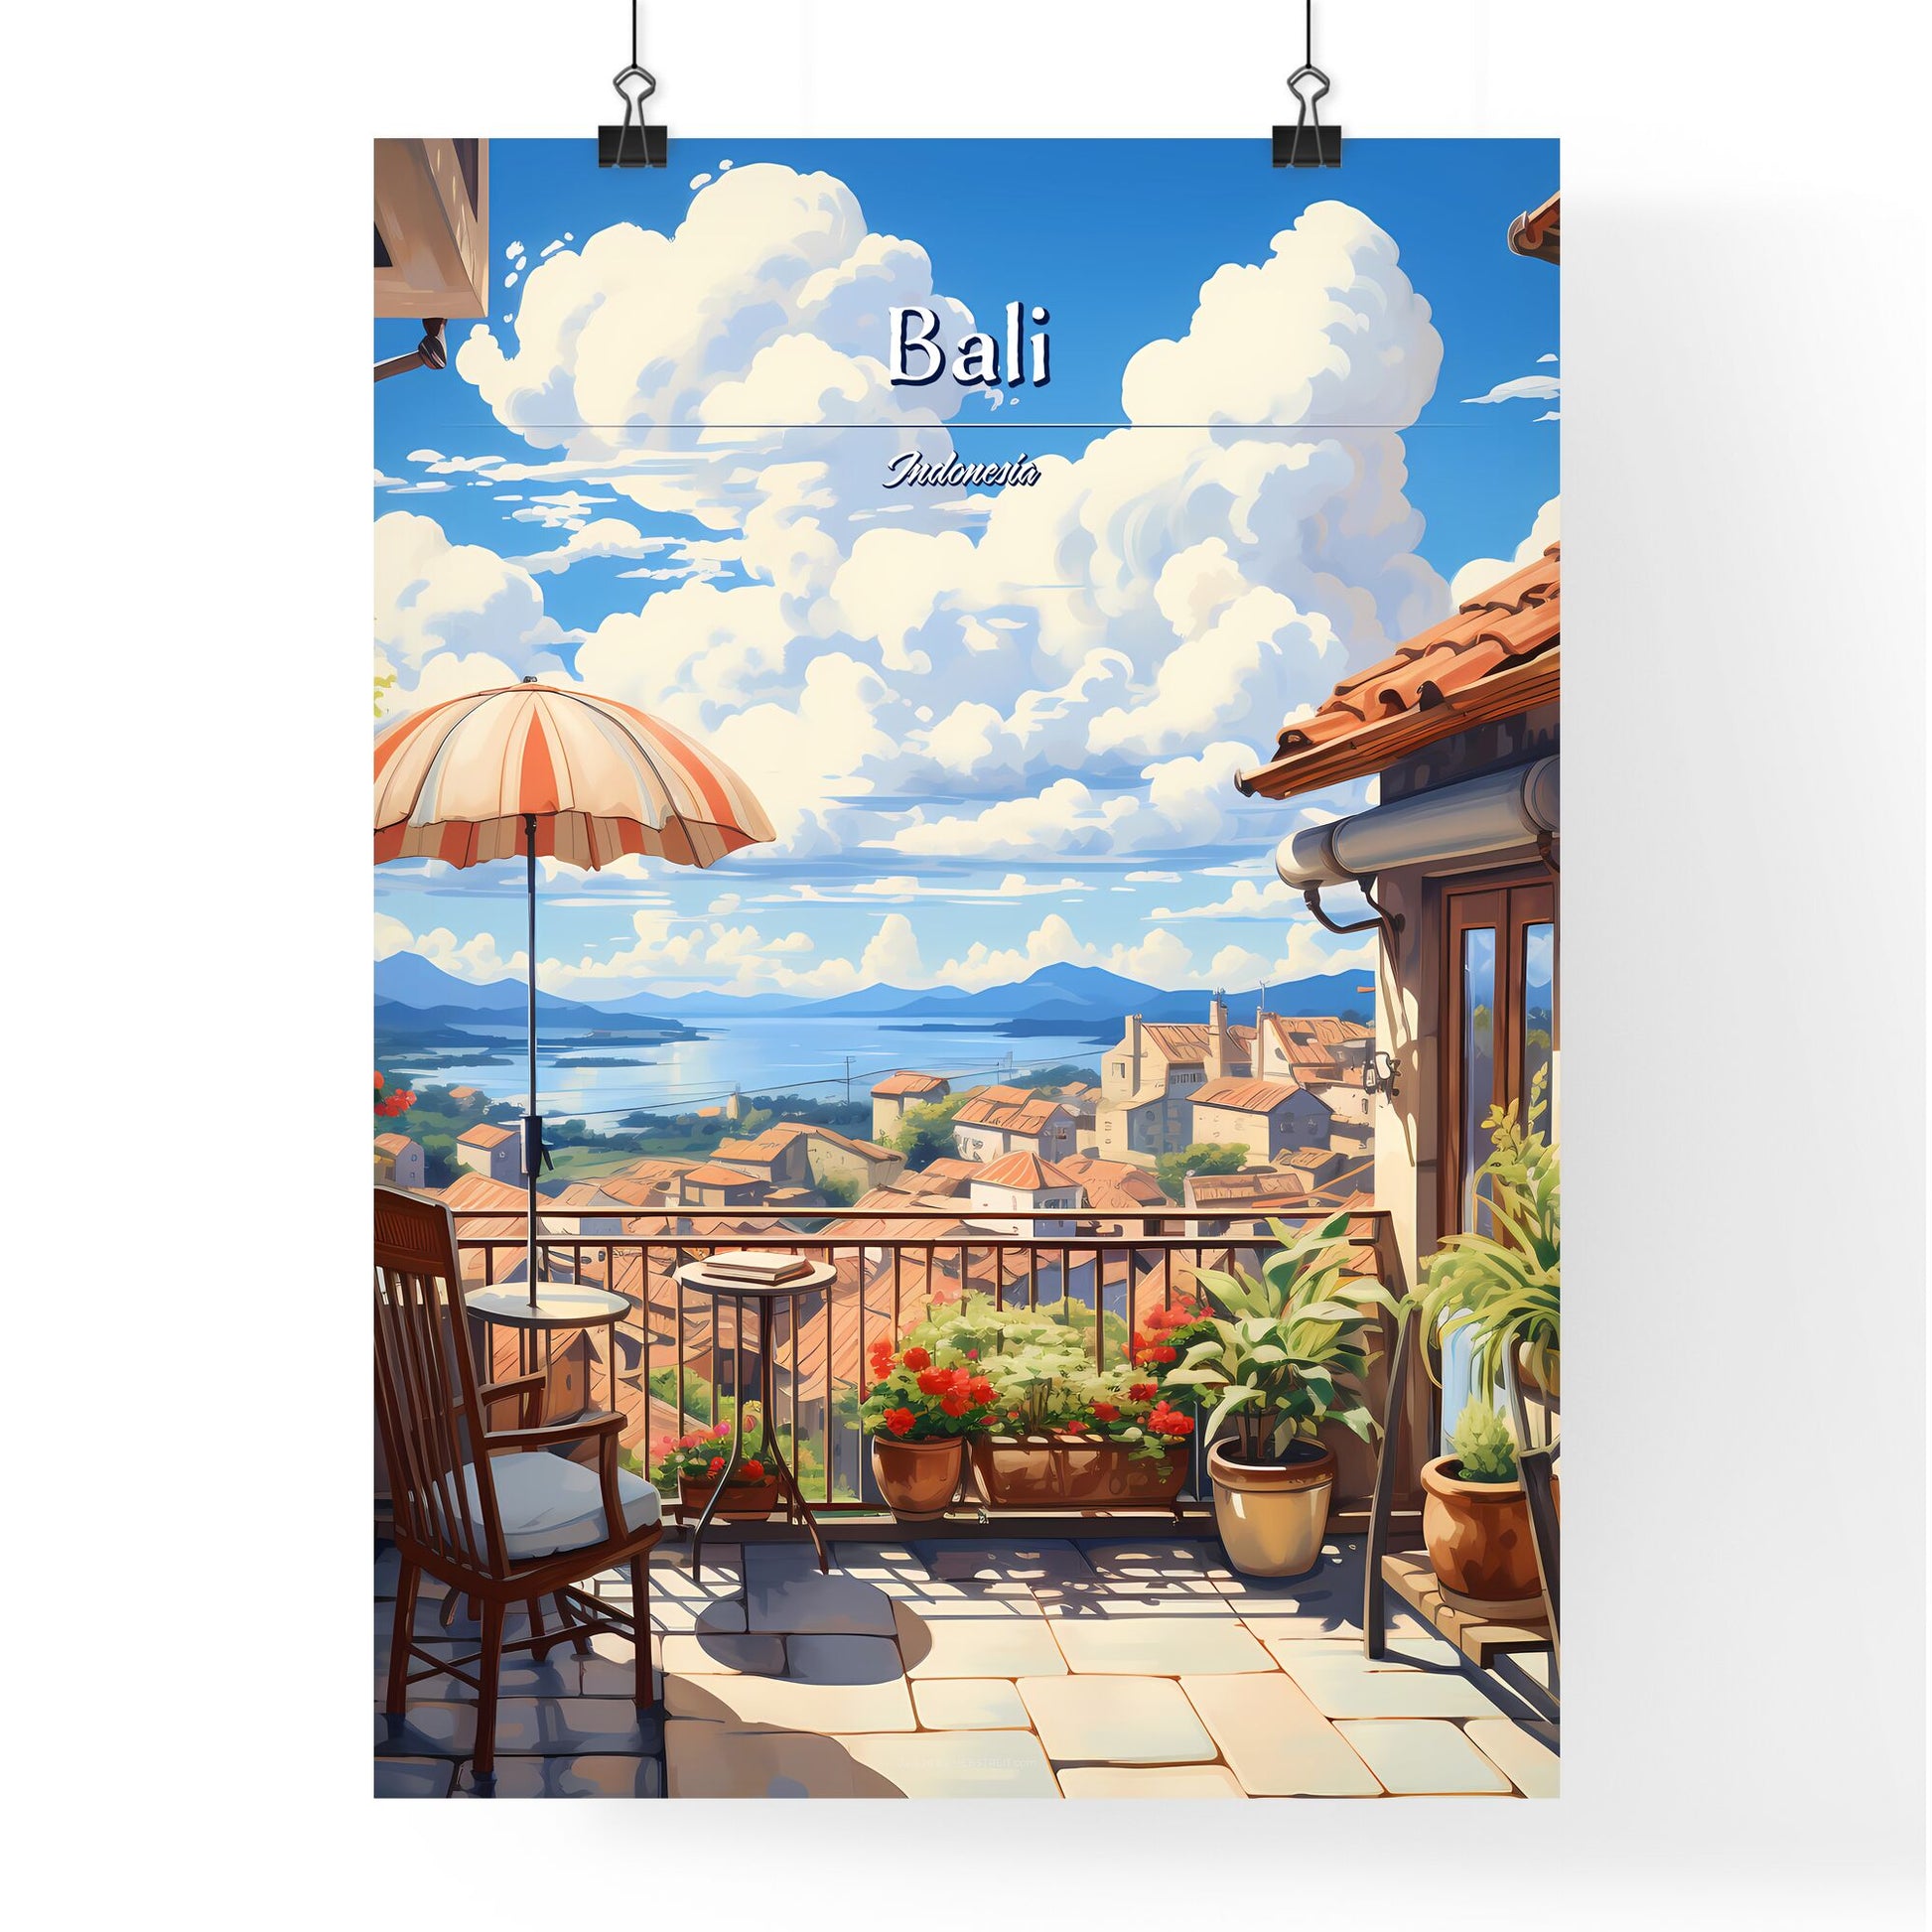 On the roofs of Bali, Indonesia - Art print of a balcony with a view of a town and a river Default Title